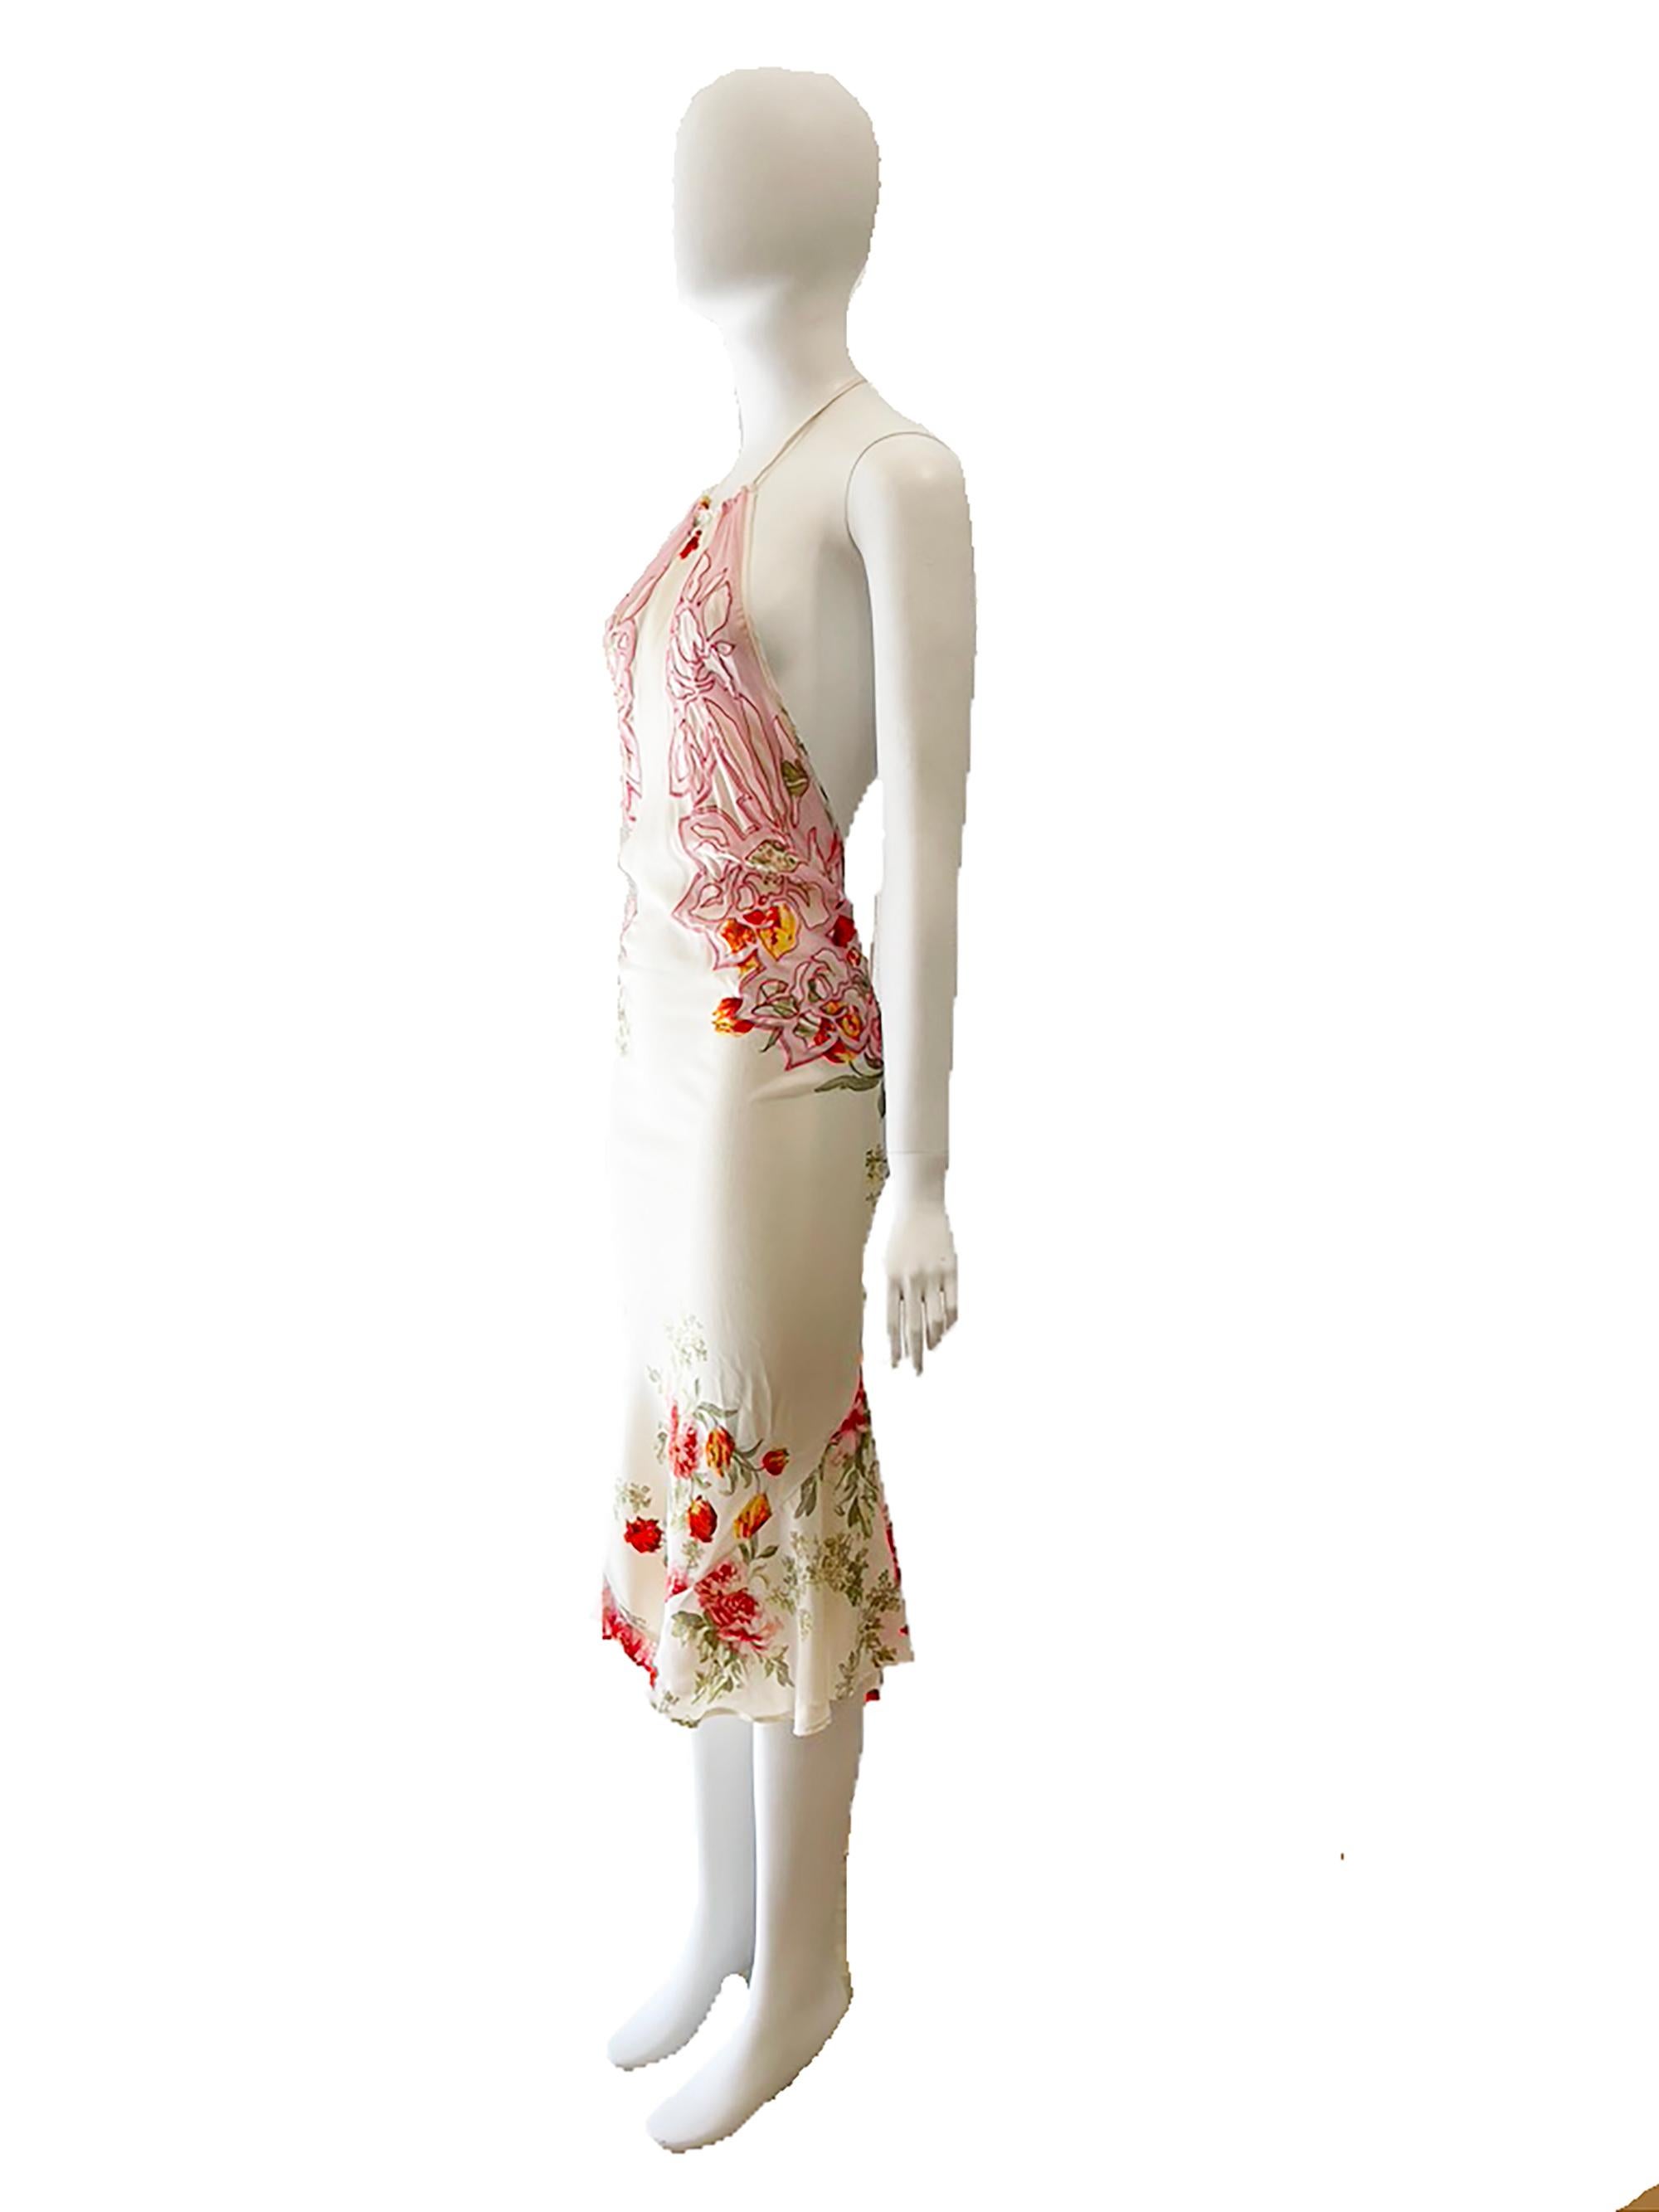 S/S 2002 Roberto Cavalli Sheer Floral Silk Backless Dress

Condition: very good
100% Silk
Made in Italy
Waist: 24